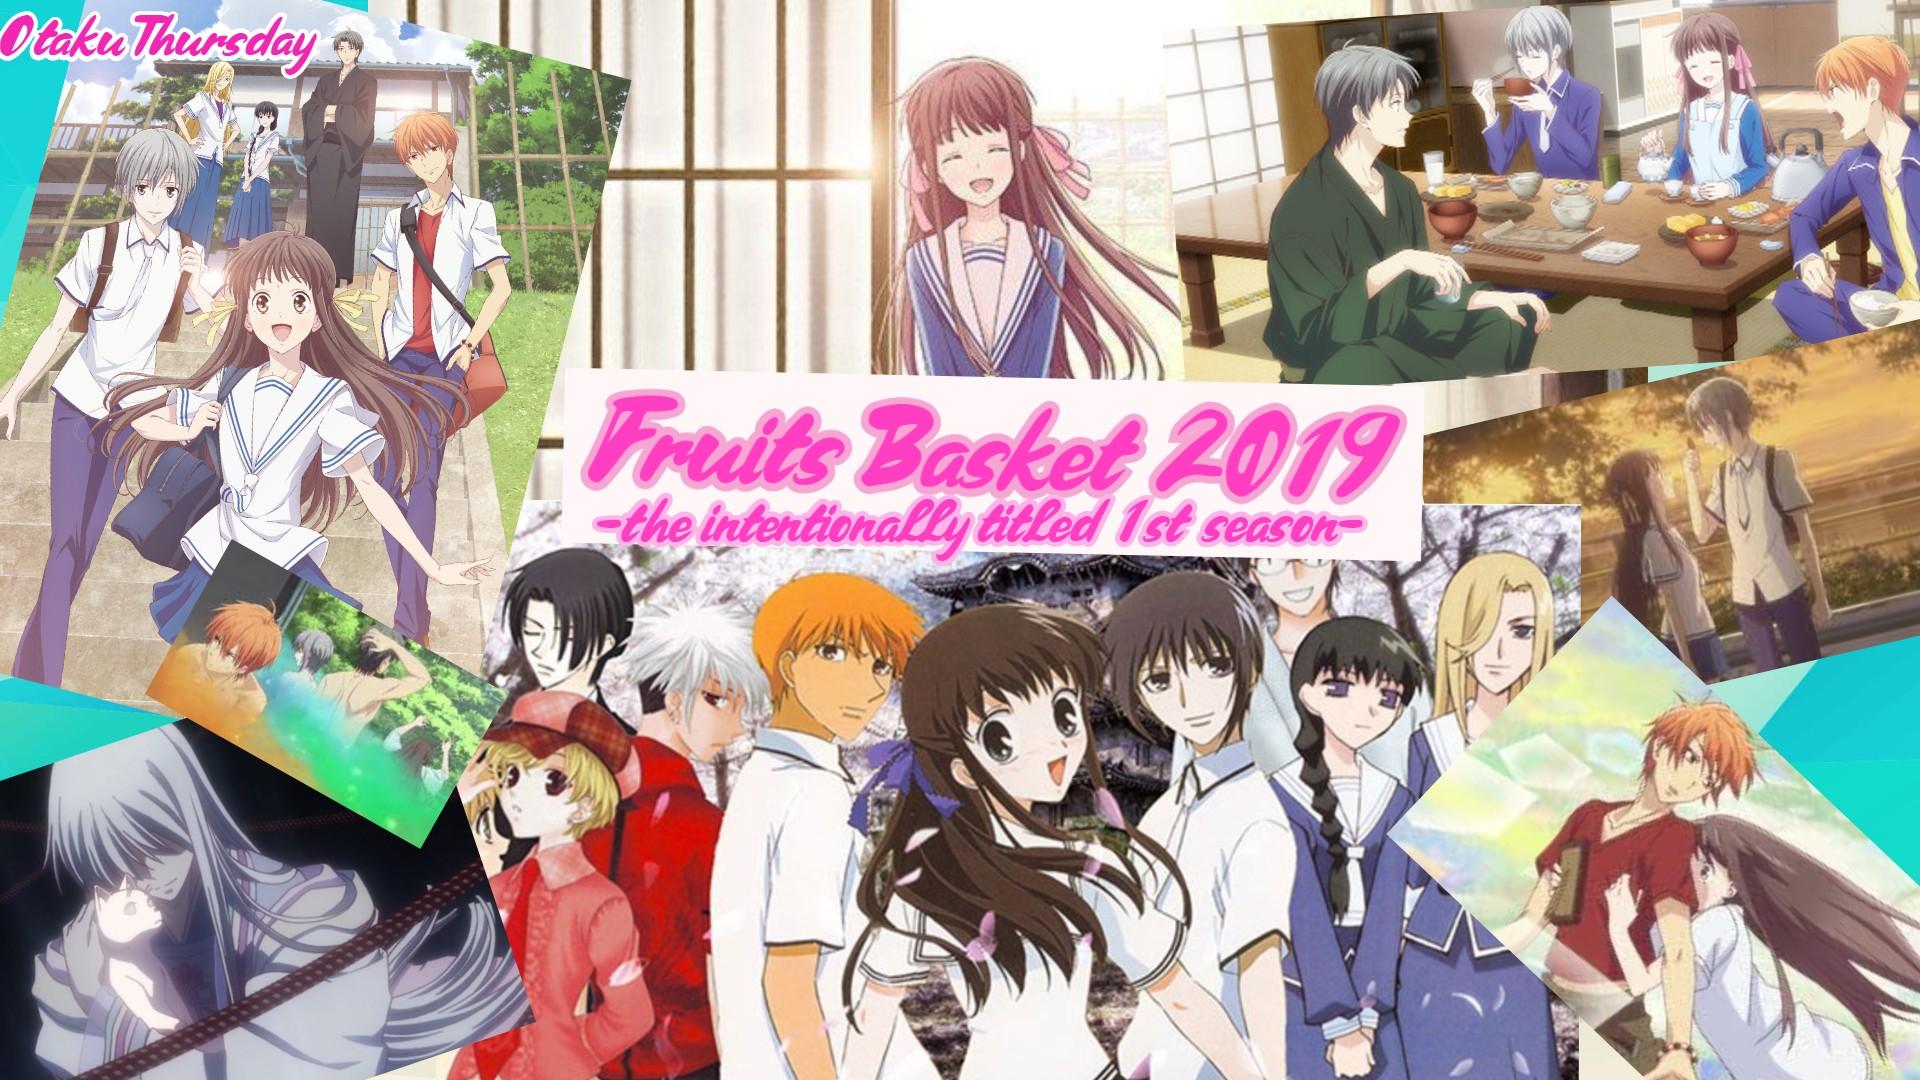 Fruits Basket 2019: the intentionally captioned FIRST season